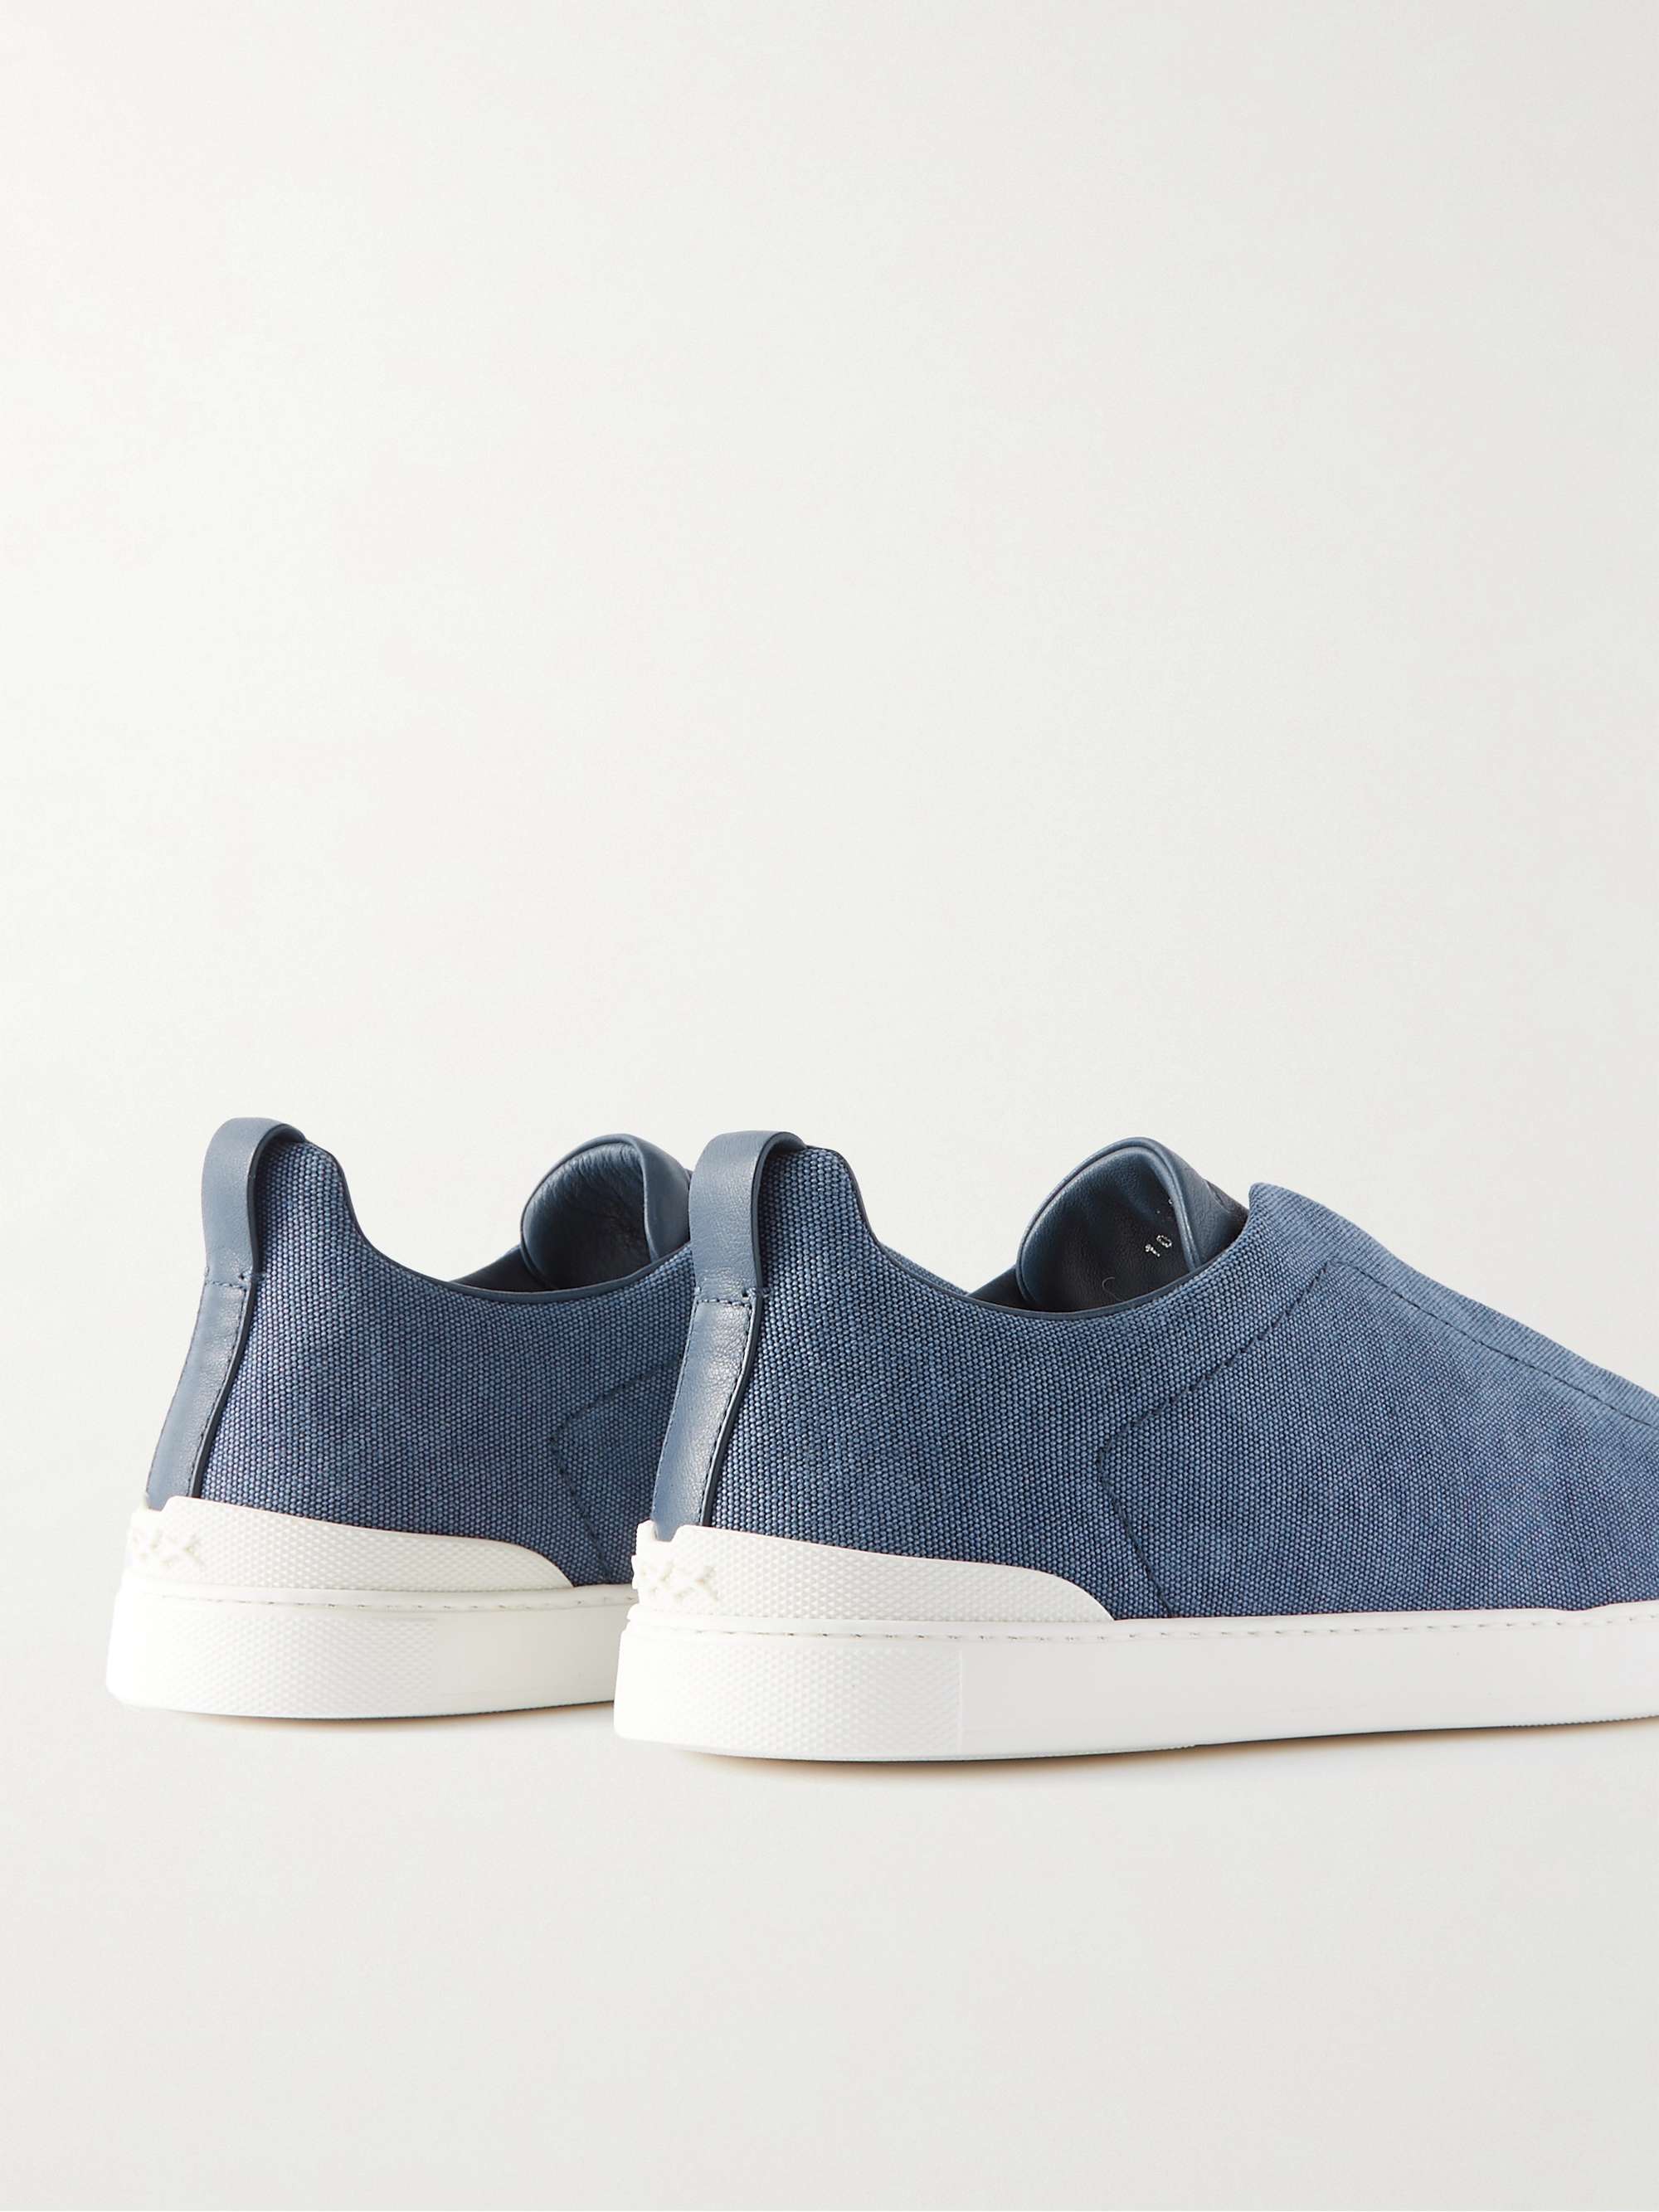 ZEGNA Triple Stitch Leather-Trimmed Canvas Sneakers